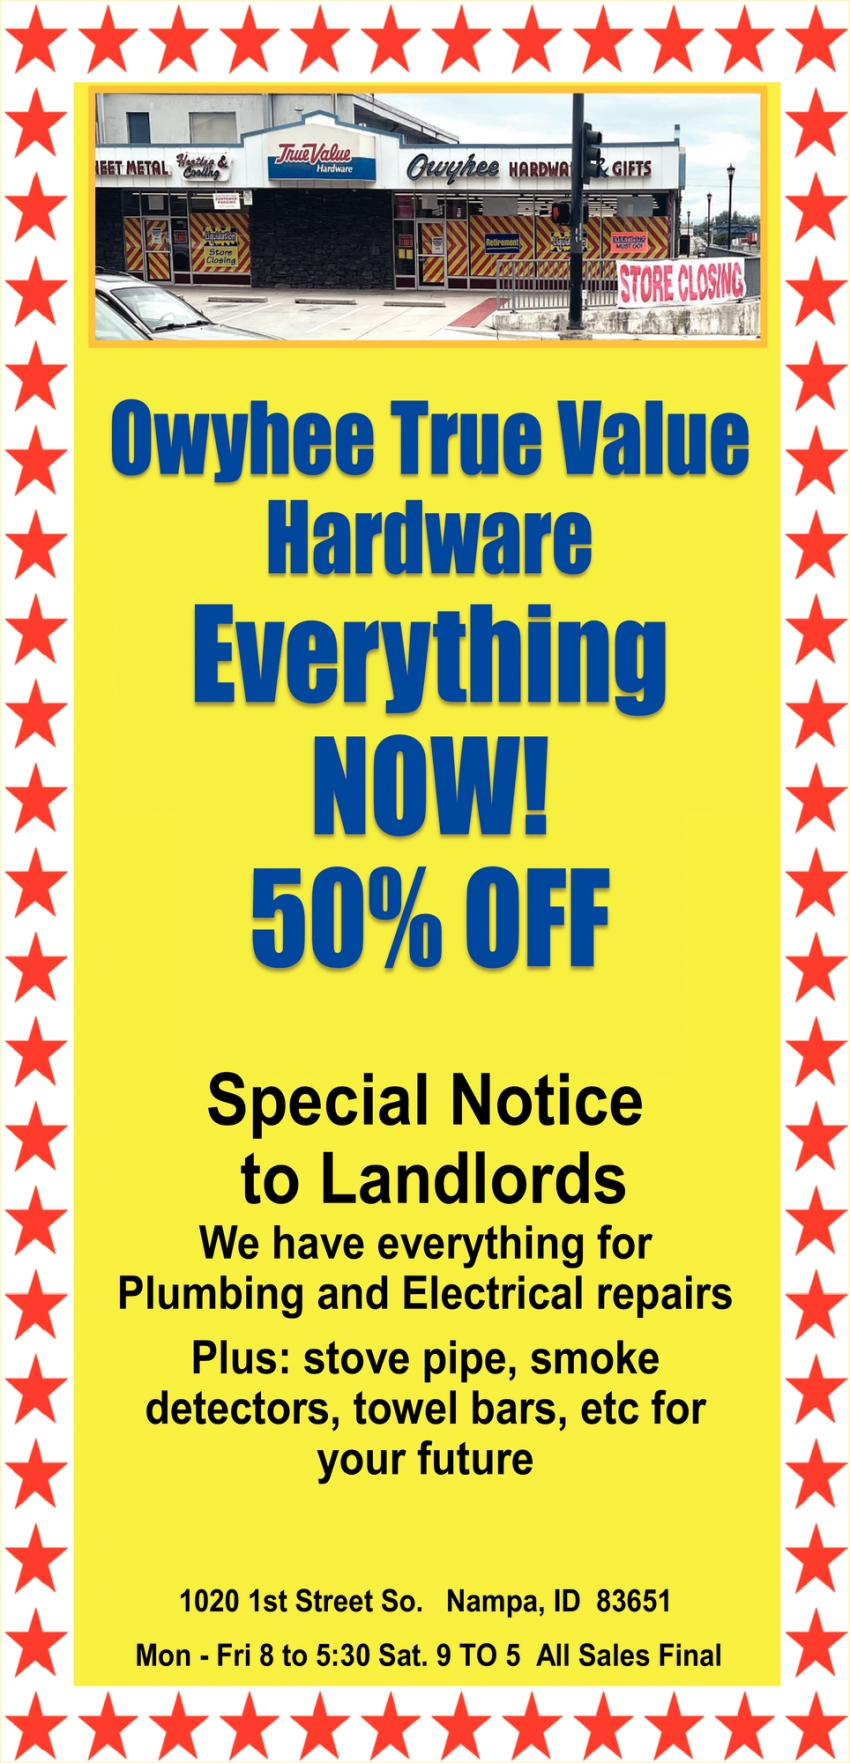 Everything Off! 50% Off